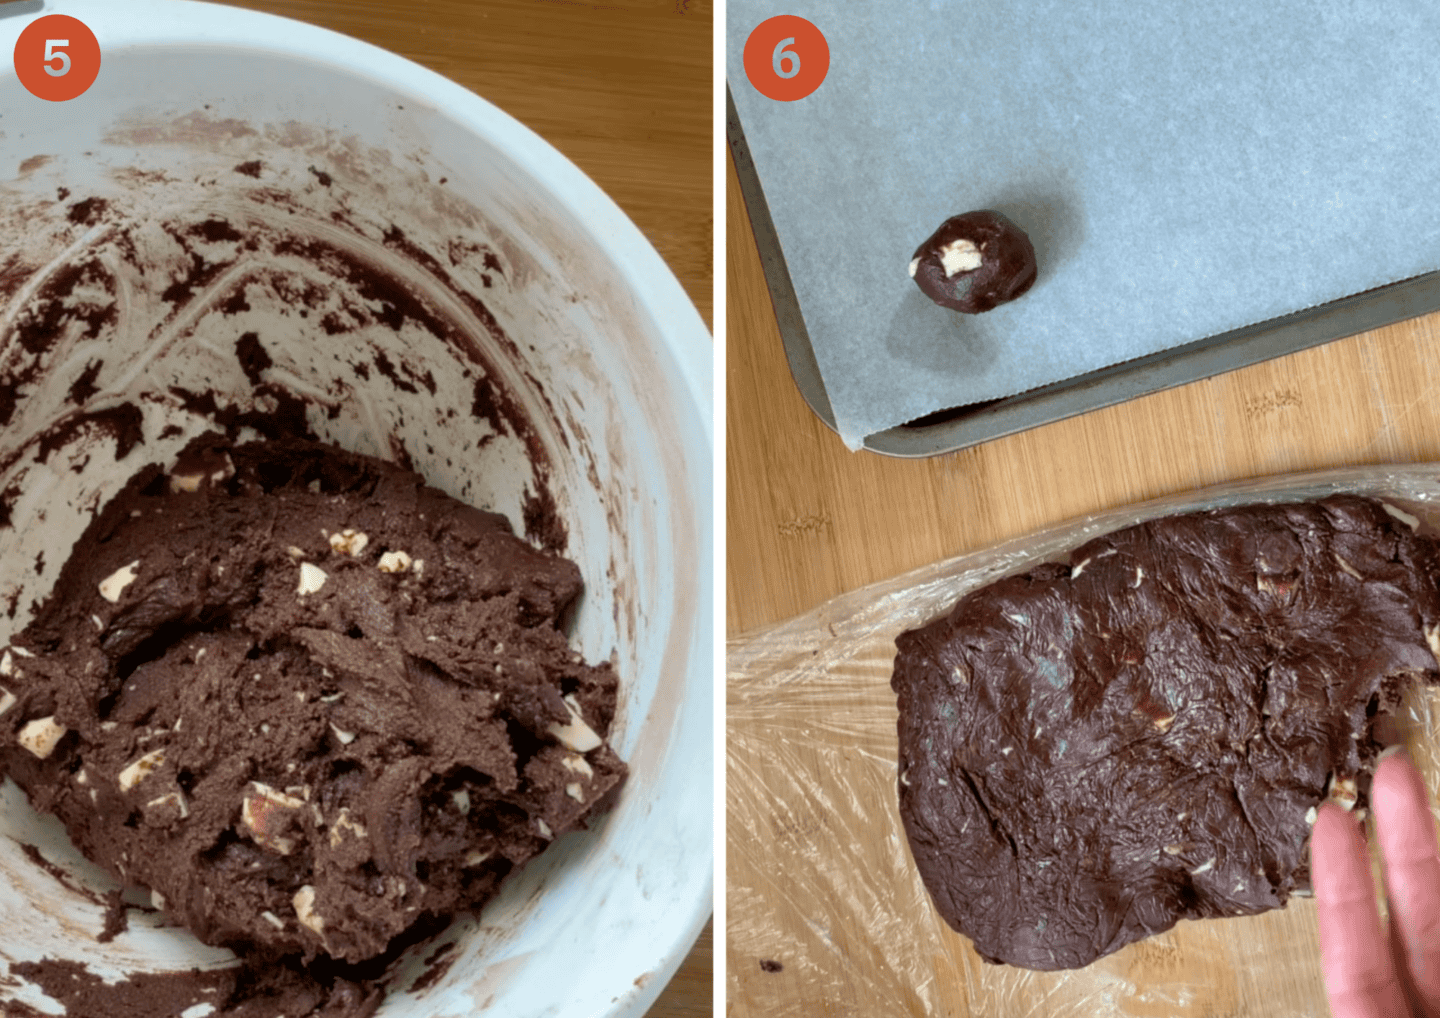 The cookie dough before chilling (left) and after being rolled into balls.